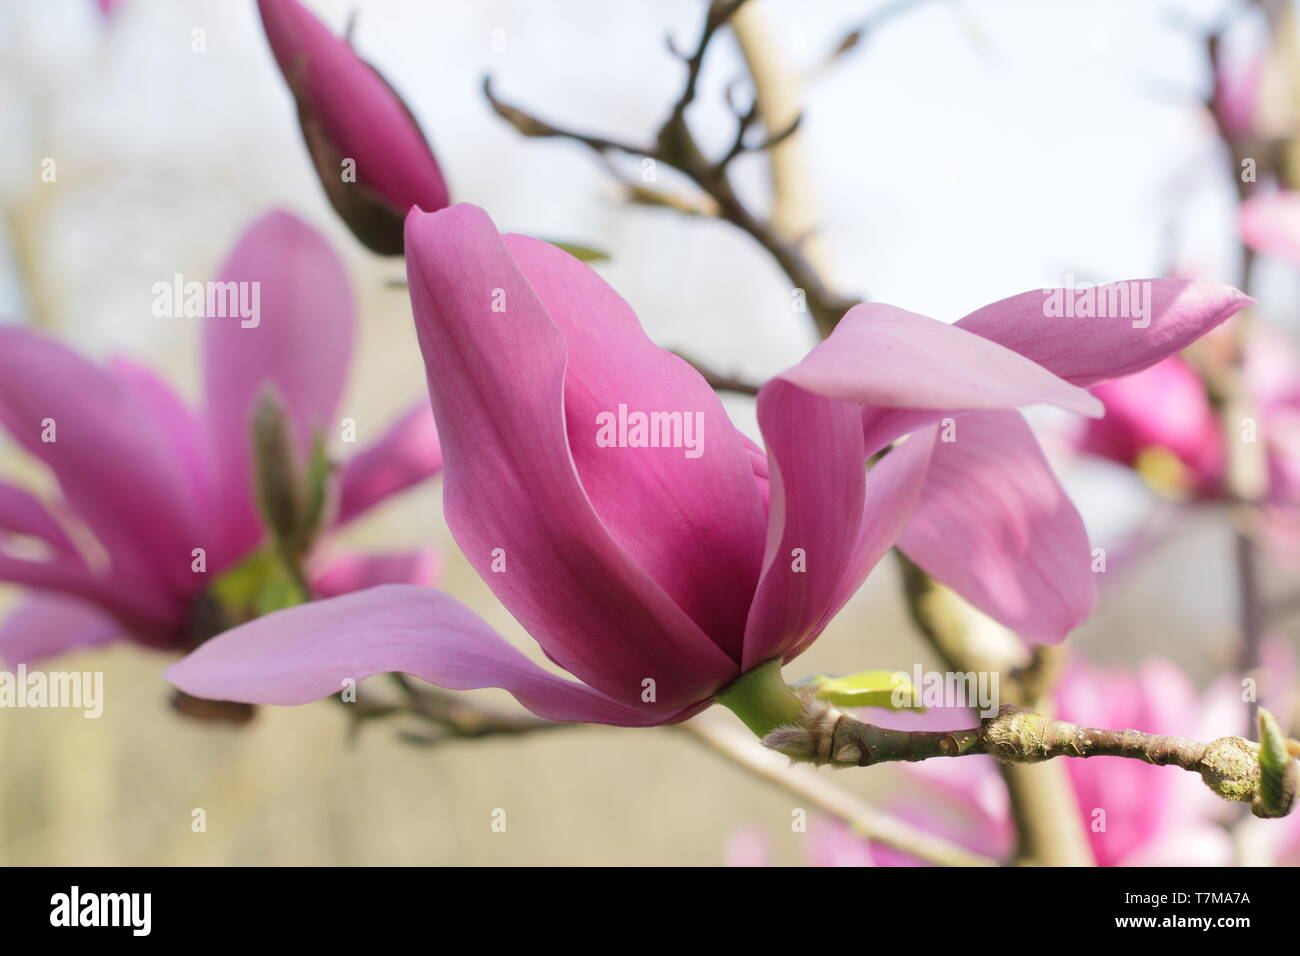 Magnolia 'Caerhays Surprise'.  Water lily shaped blossoms of Magnolia 'Caerhays Surprise' in spring. UK. AGM Stock Photo